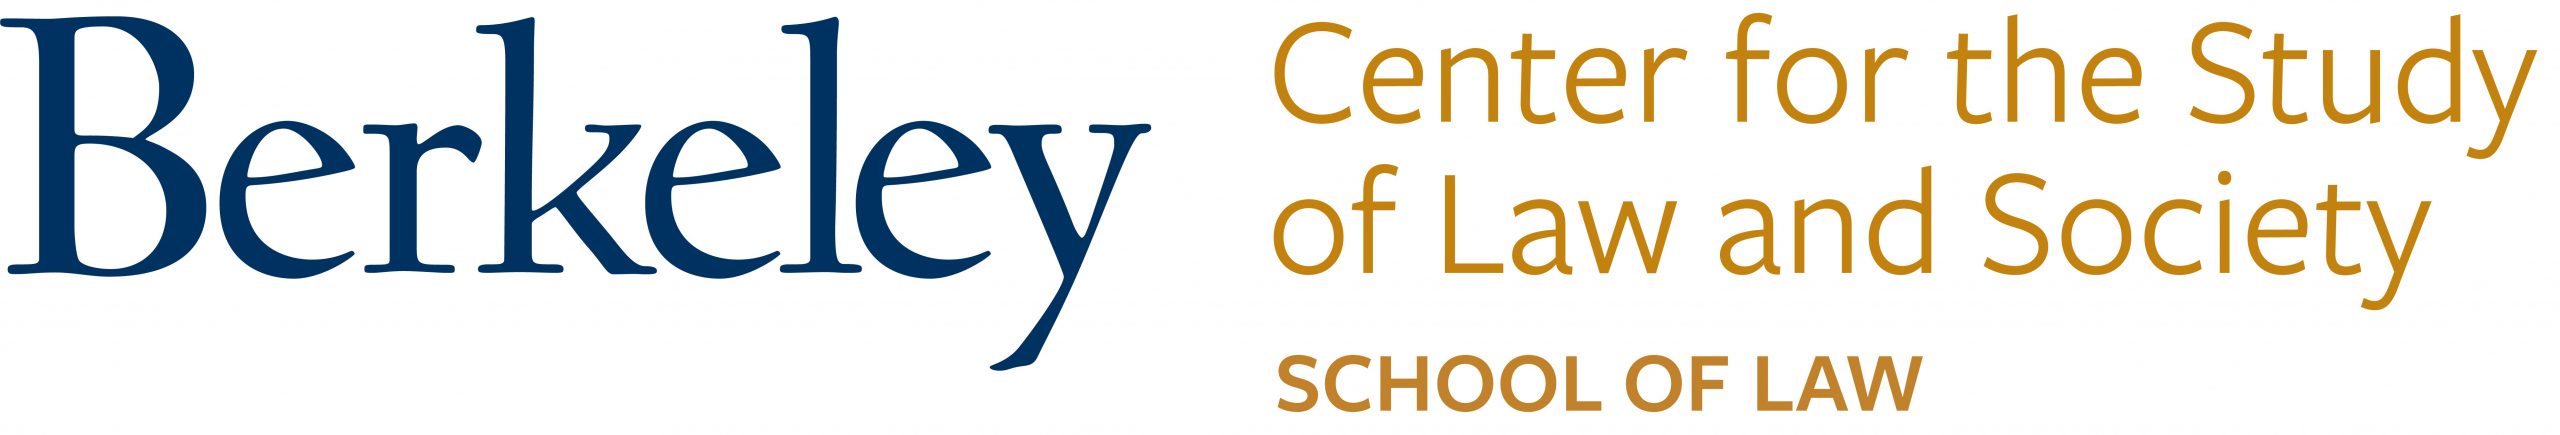 Berkeley Law Center for the Study of Law and Society